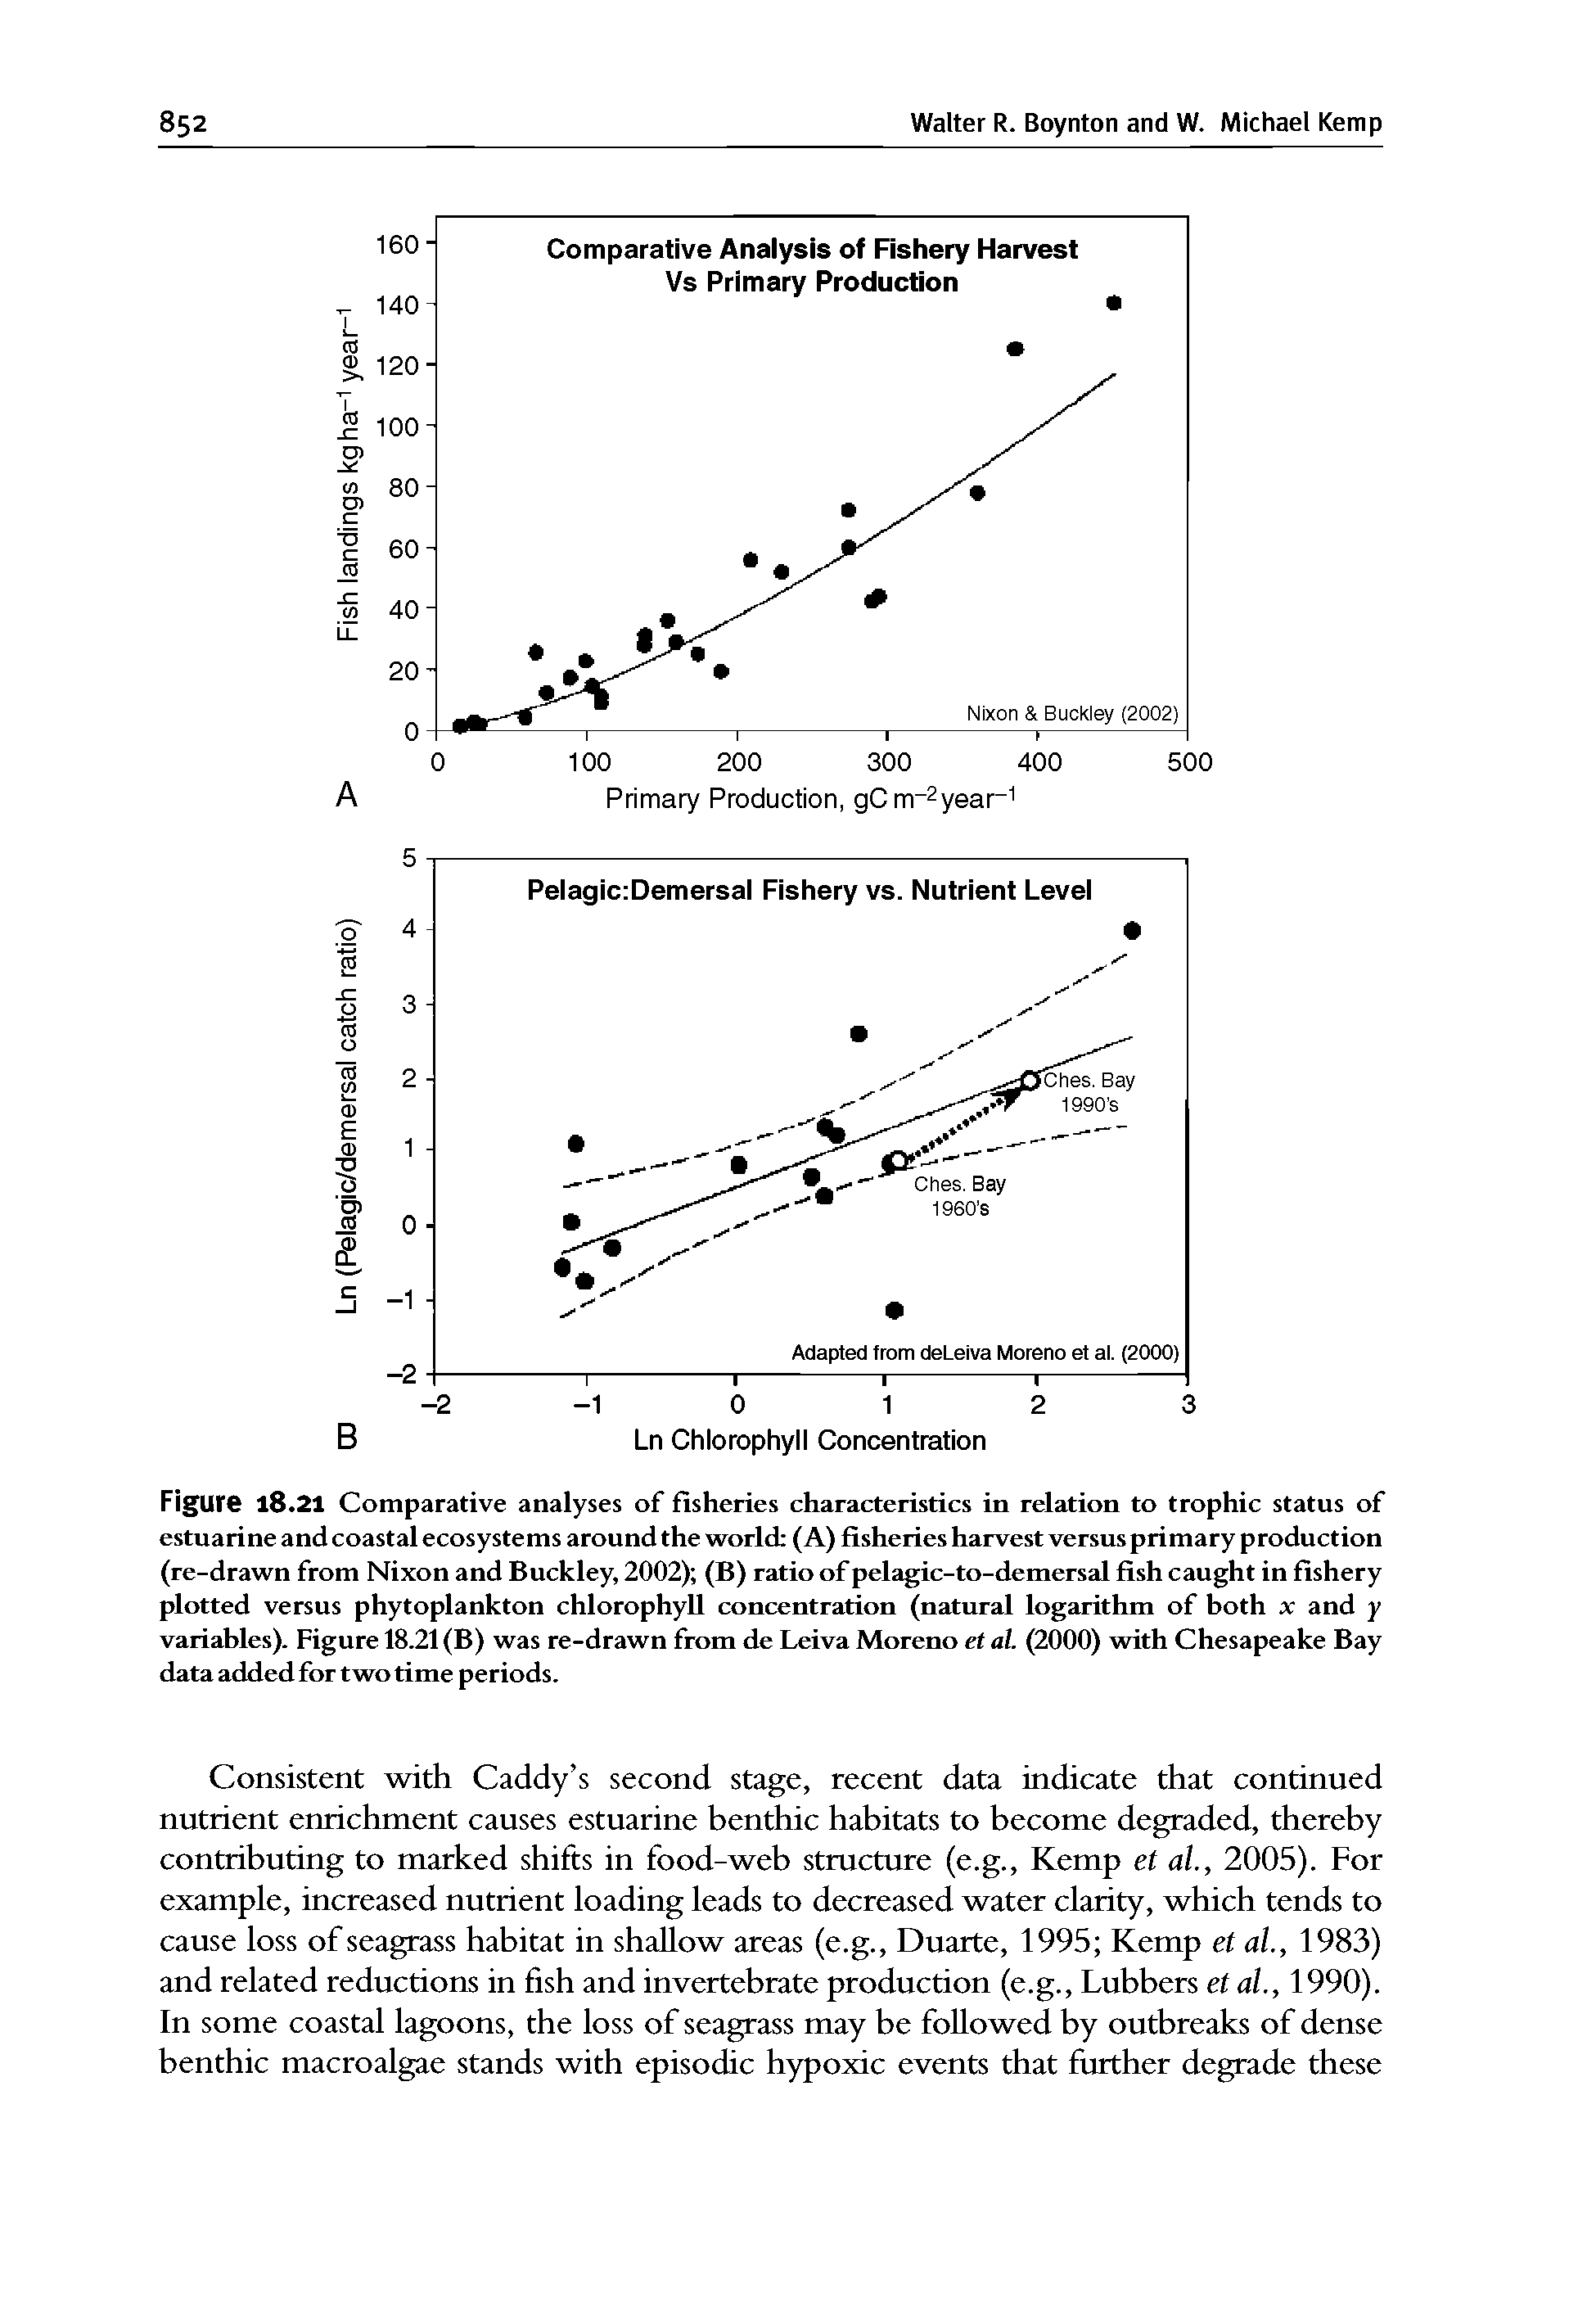 Figure 18.21 Comparative analyses of fisheries characteristics in relation to trophic status of estuarine and coastal ecosystems around the world (A) fisheries harvest versus primary production (re-drawn from Nixon and Buckley, 2002) (B) ratio of pelagic-to-demersal fish caught in fishery plotted versus phytoplankton chlorophyll concentration (natural logarithm of hoth x and y variahles). Figure 18.21 (B) was re-drawn from de Leiva Moreno et al. (2000) with Chesapeake Bay data added for two time periods.